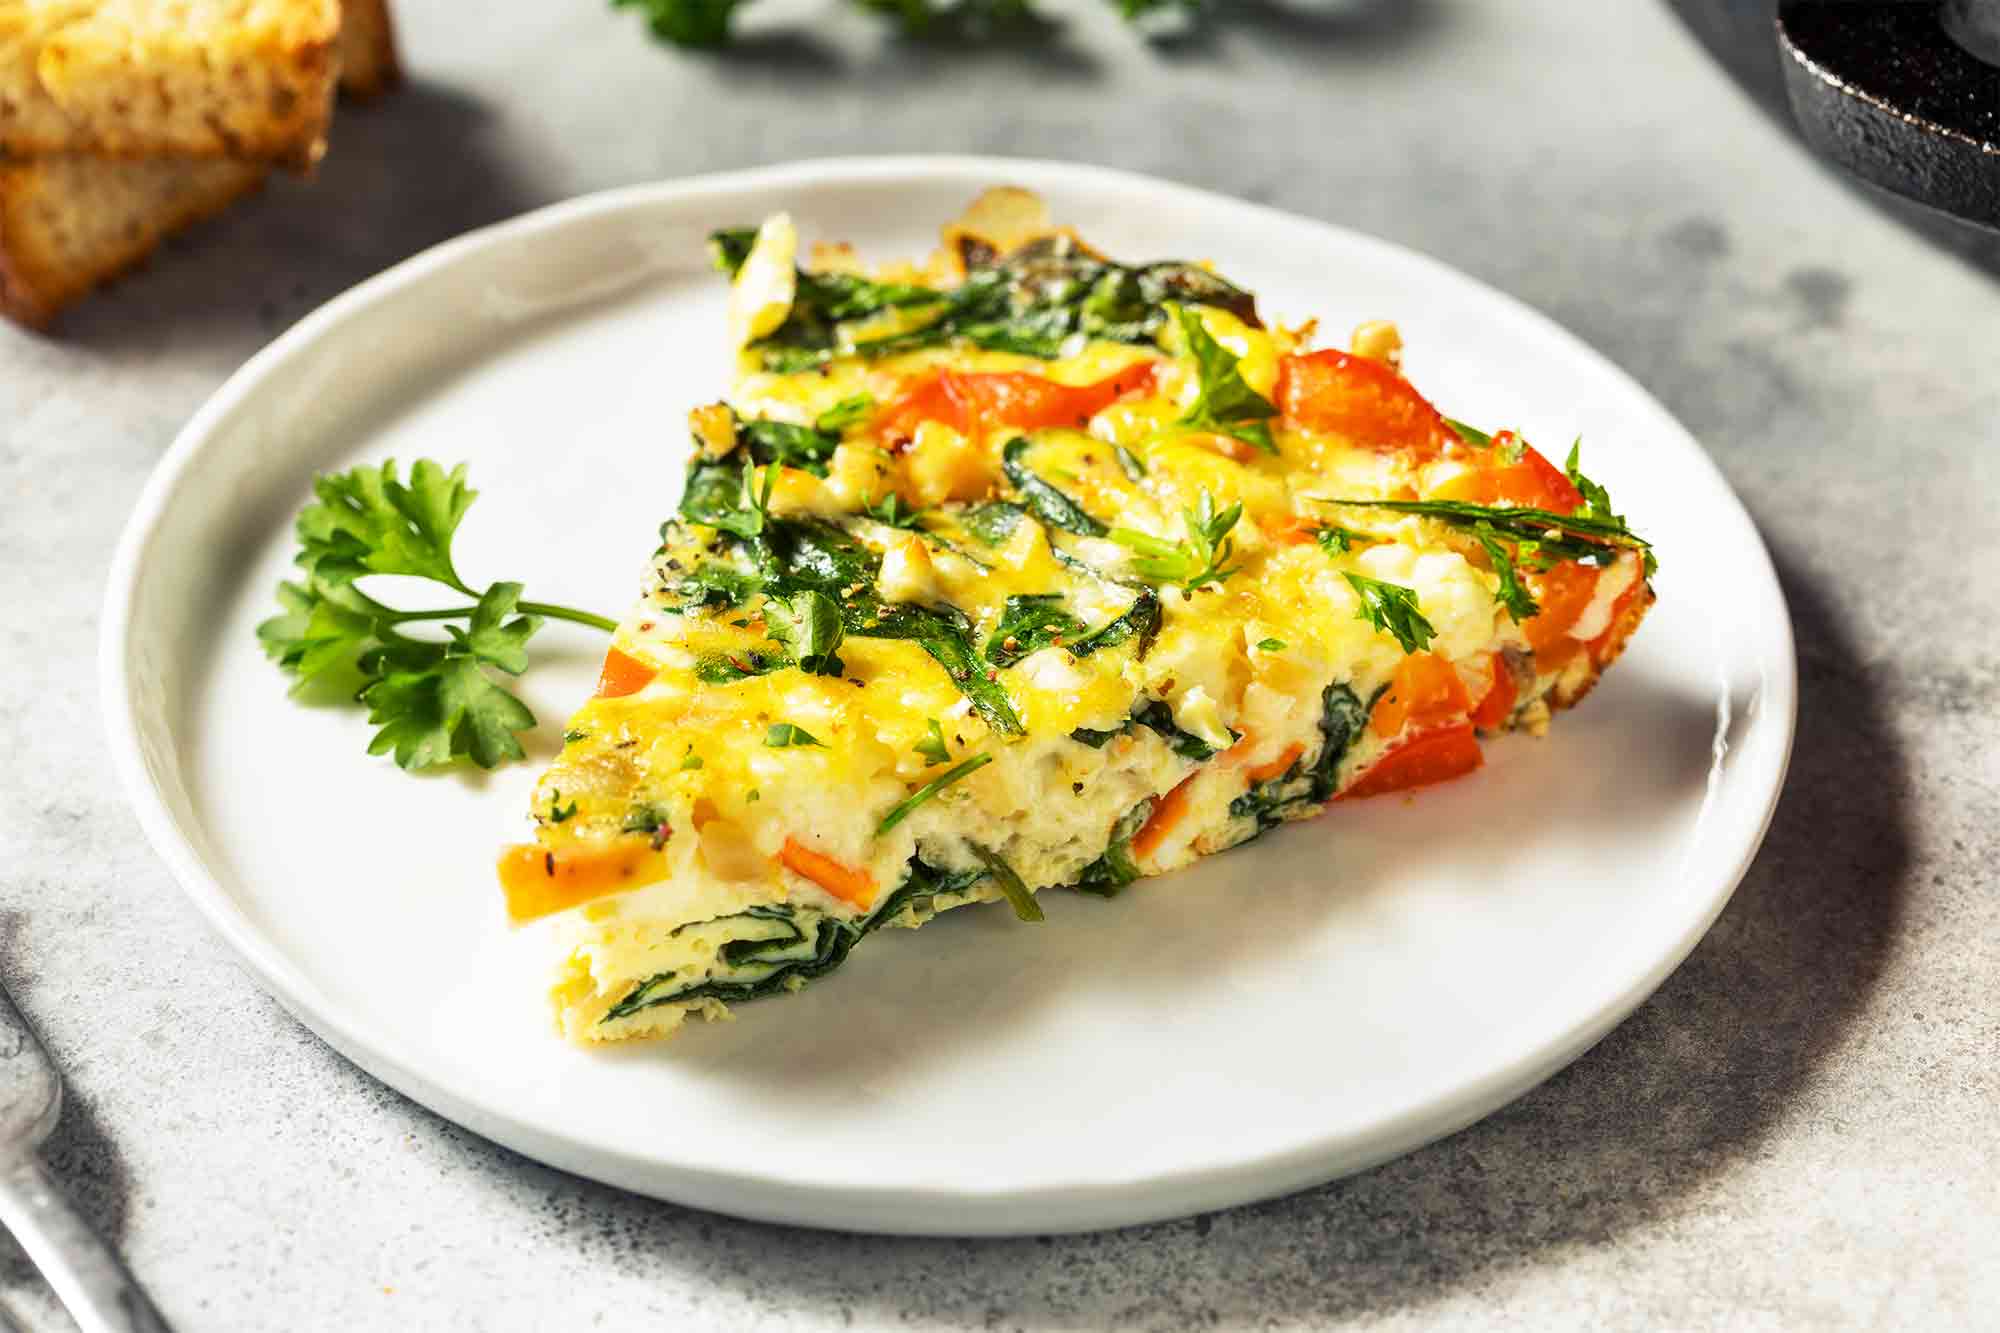 Homemade Egg and Spinach Frittata - How To Make Recipes